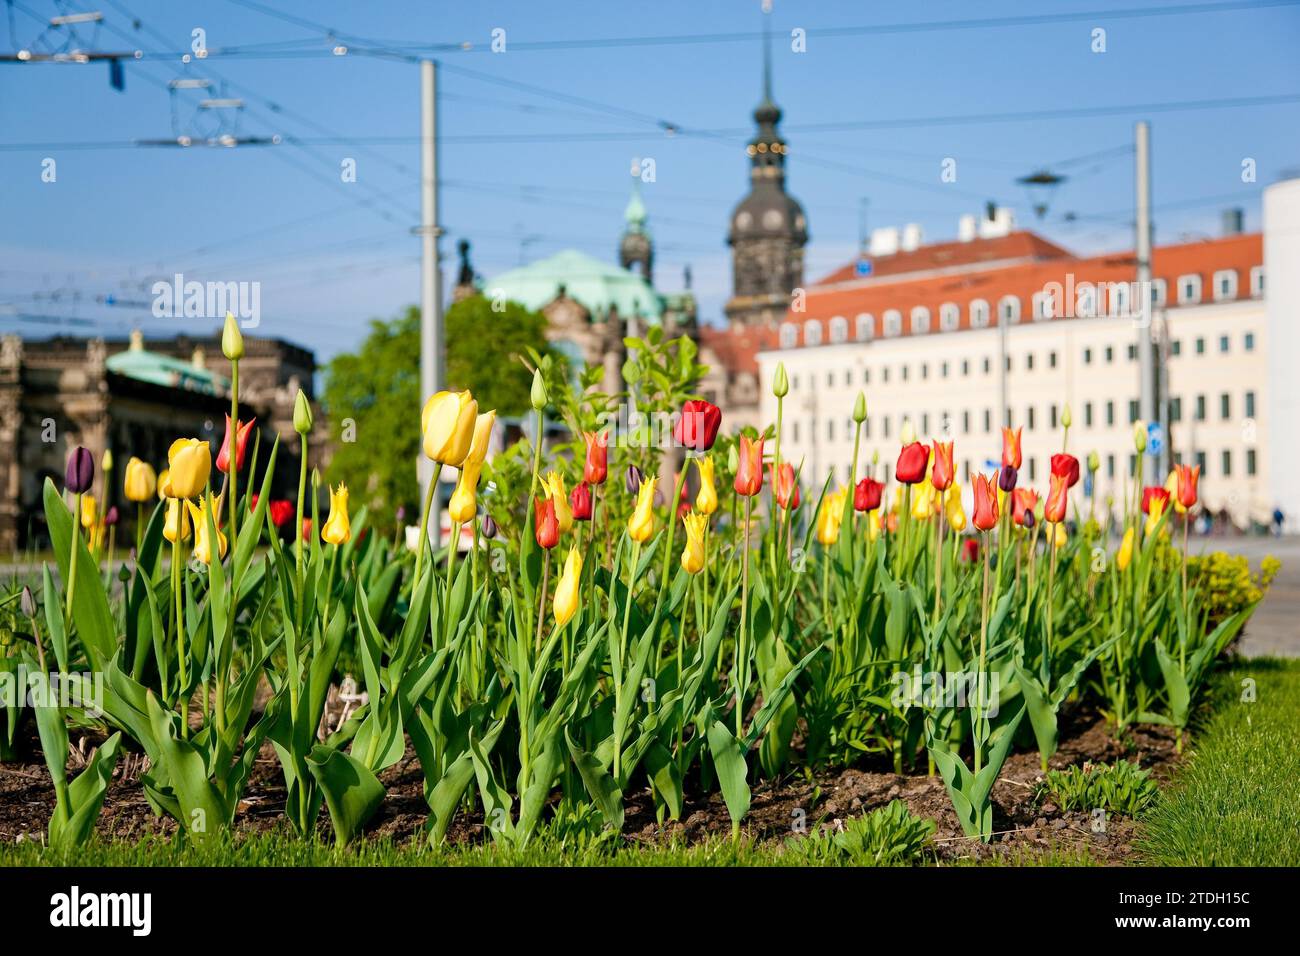 Thanks to the greening of Dresden's Postplatz, which was prompted by public protests, visitors can now also enjoy spring there Stock Photo